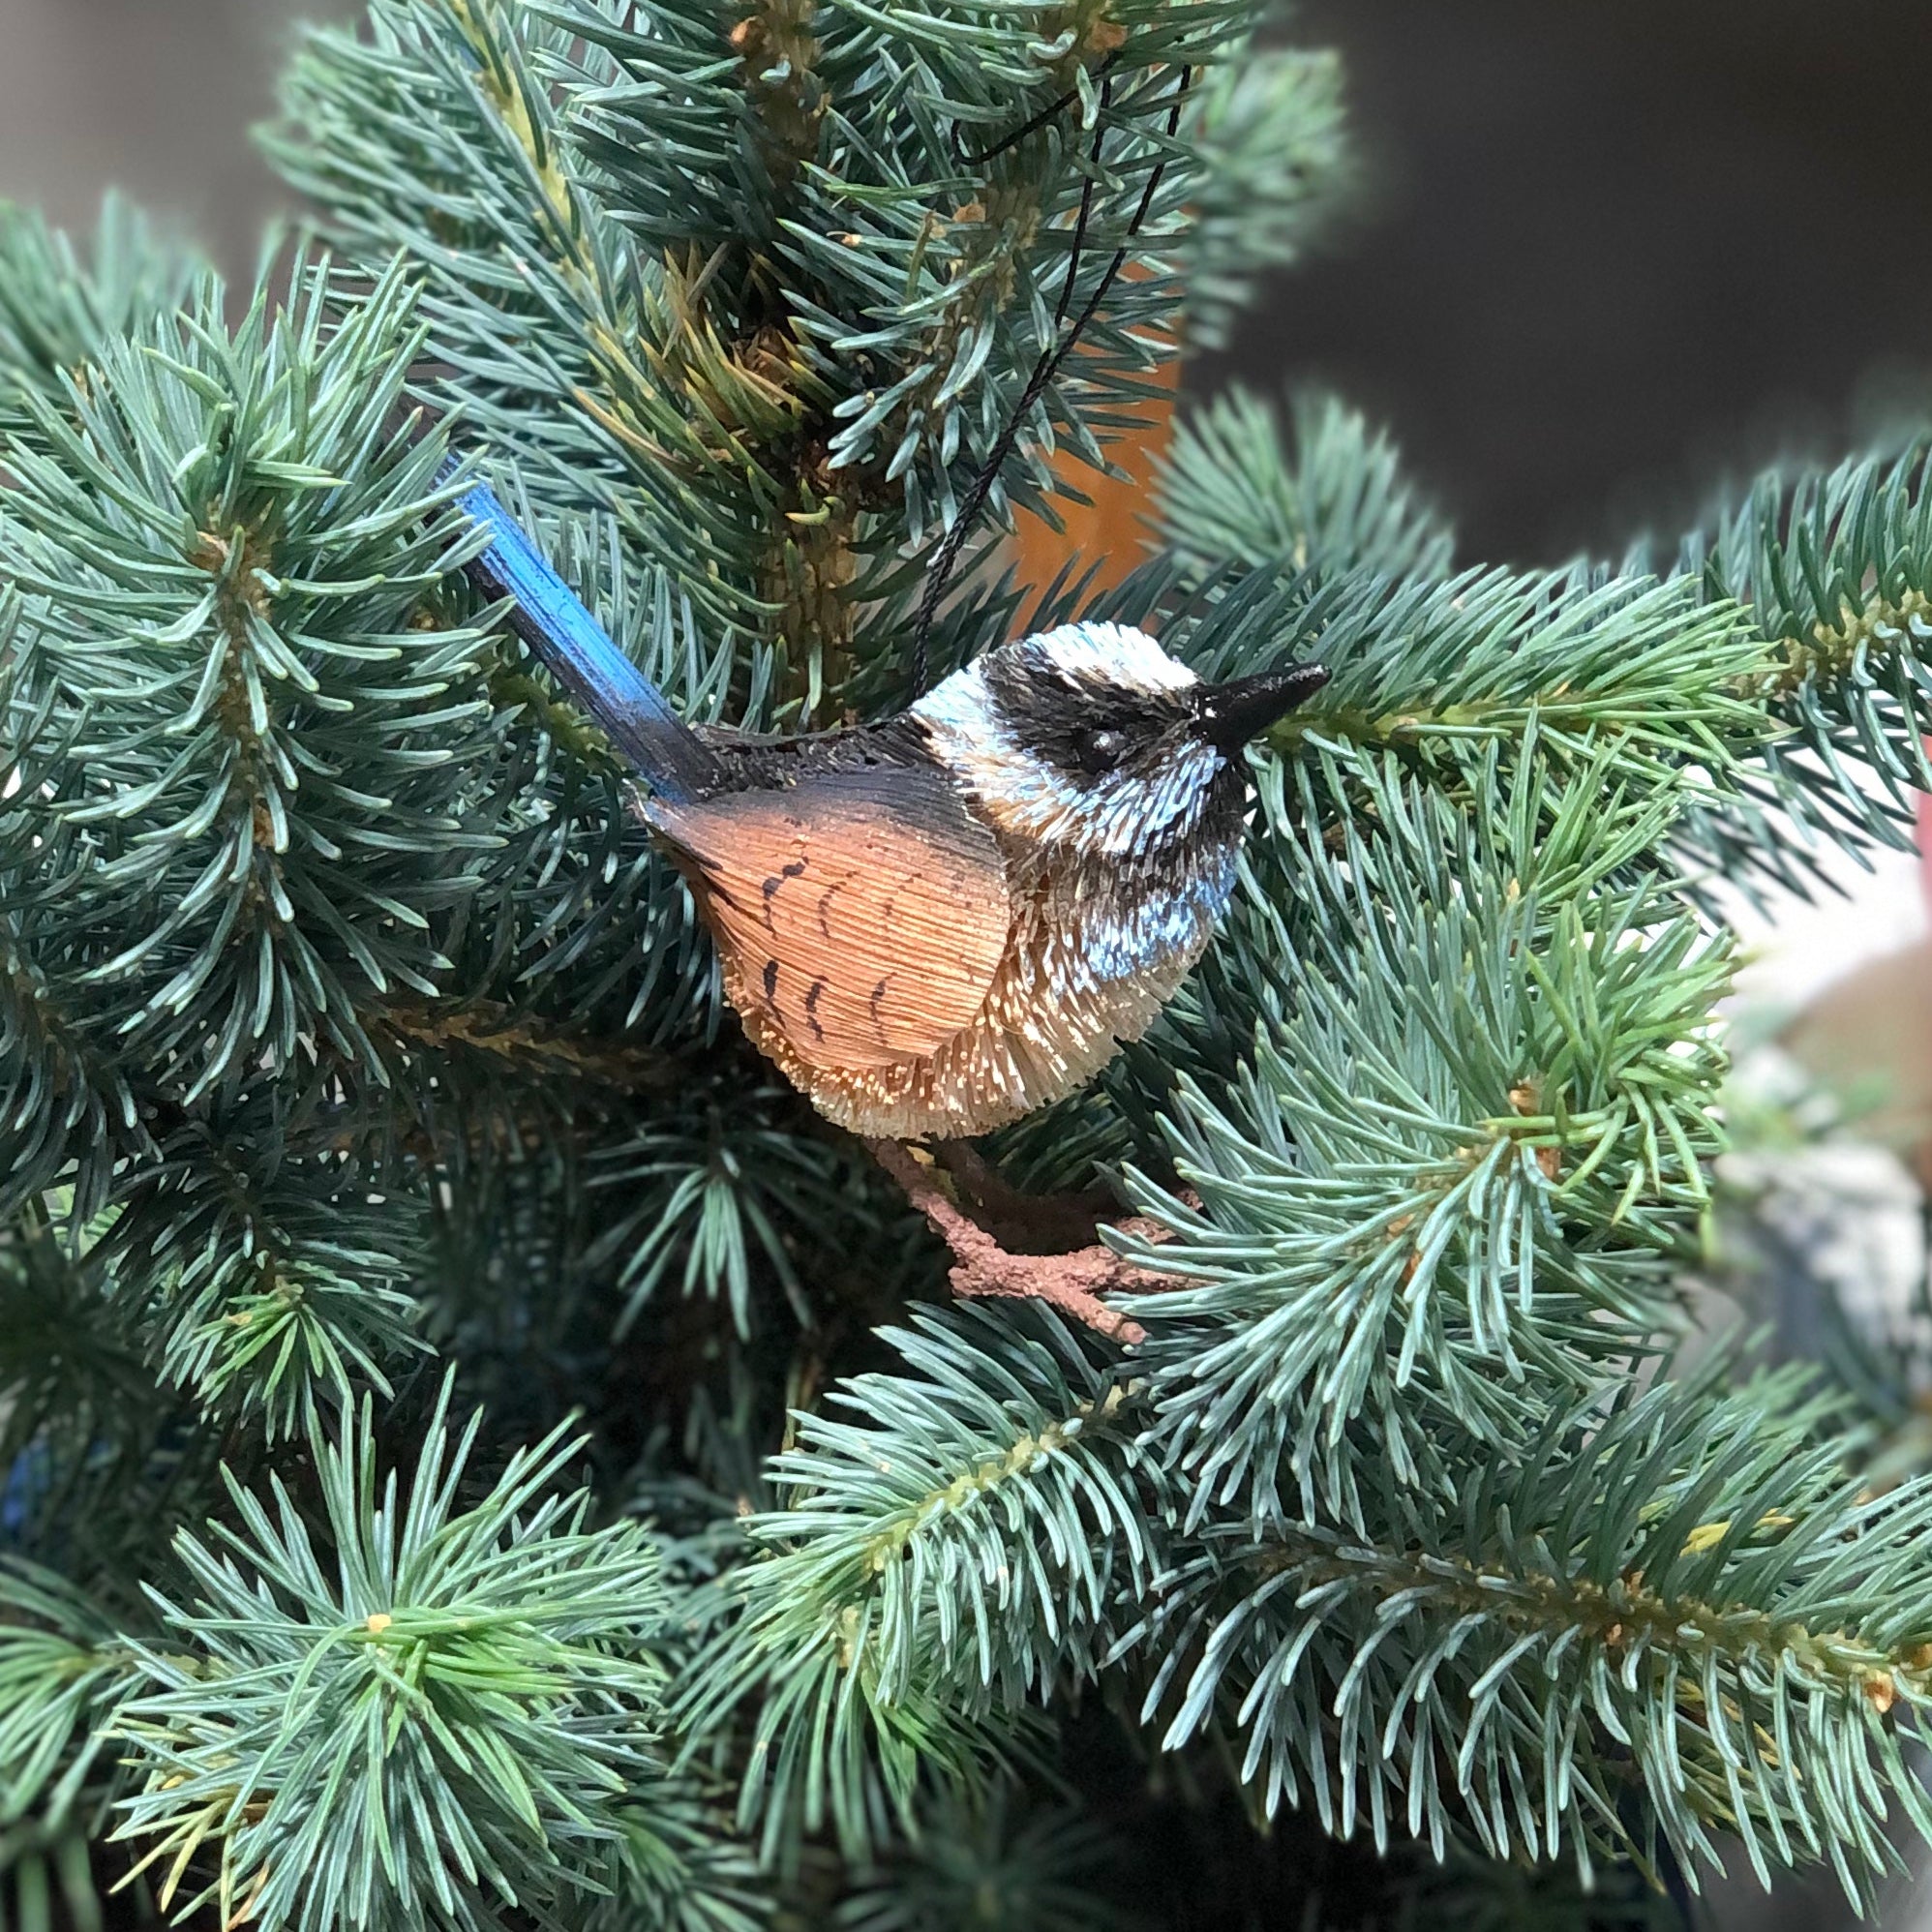 Sweet bristlebrush wren holiday ornament - available at scouthouse.com.au